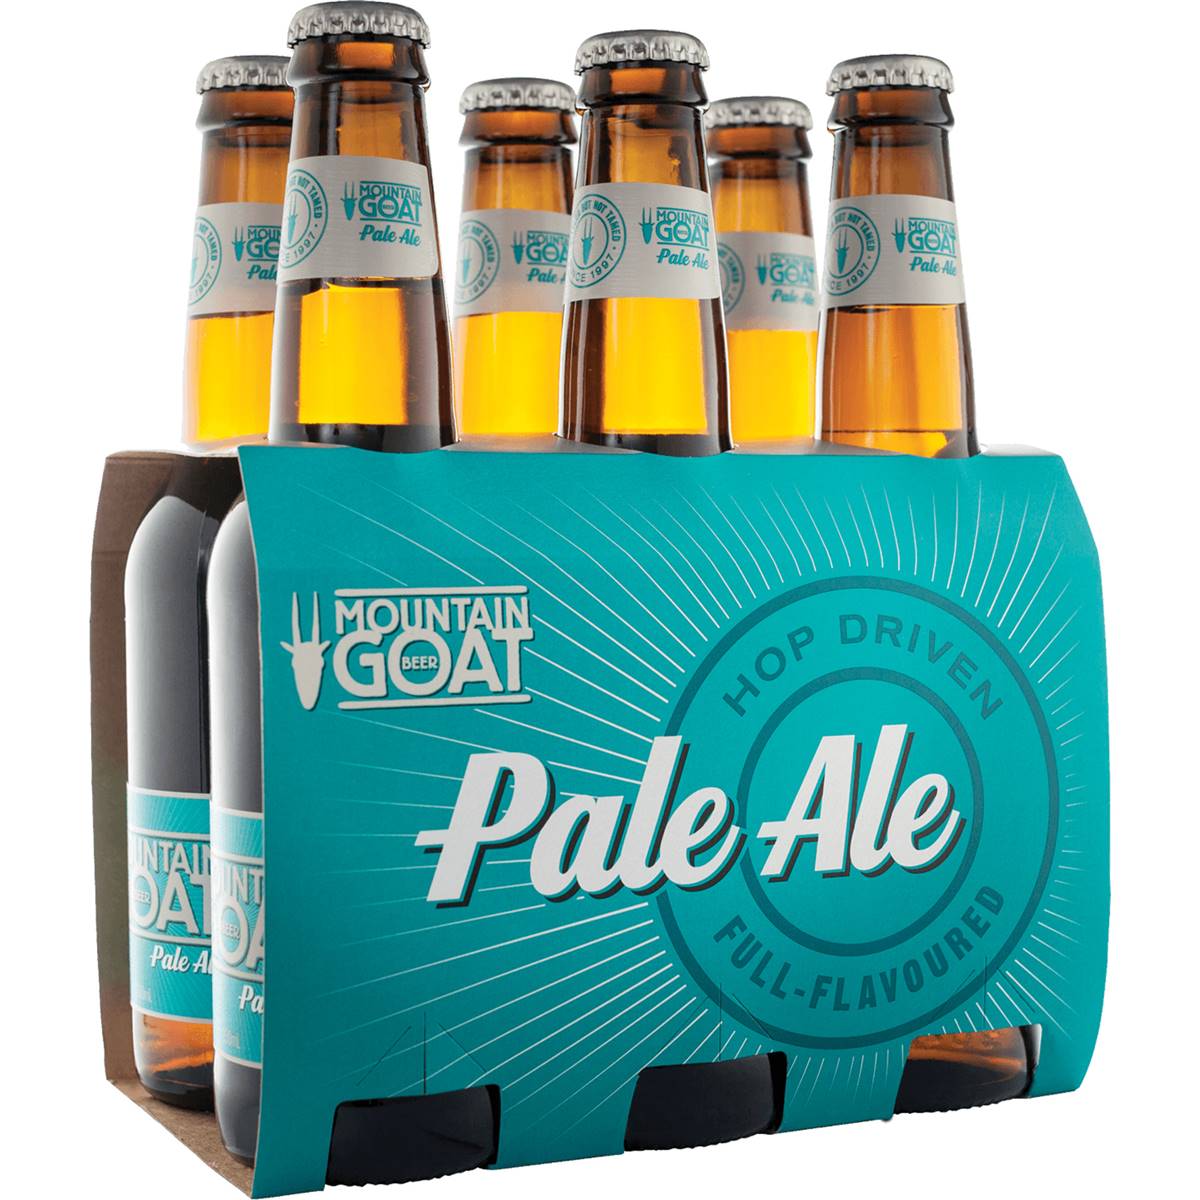 Calories in Mountain Goat Pale Ale Bottles